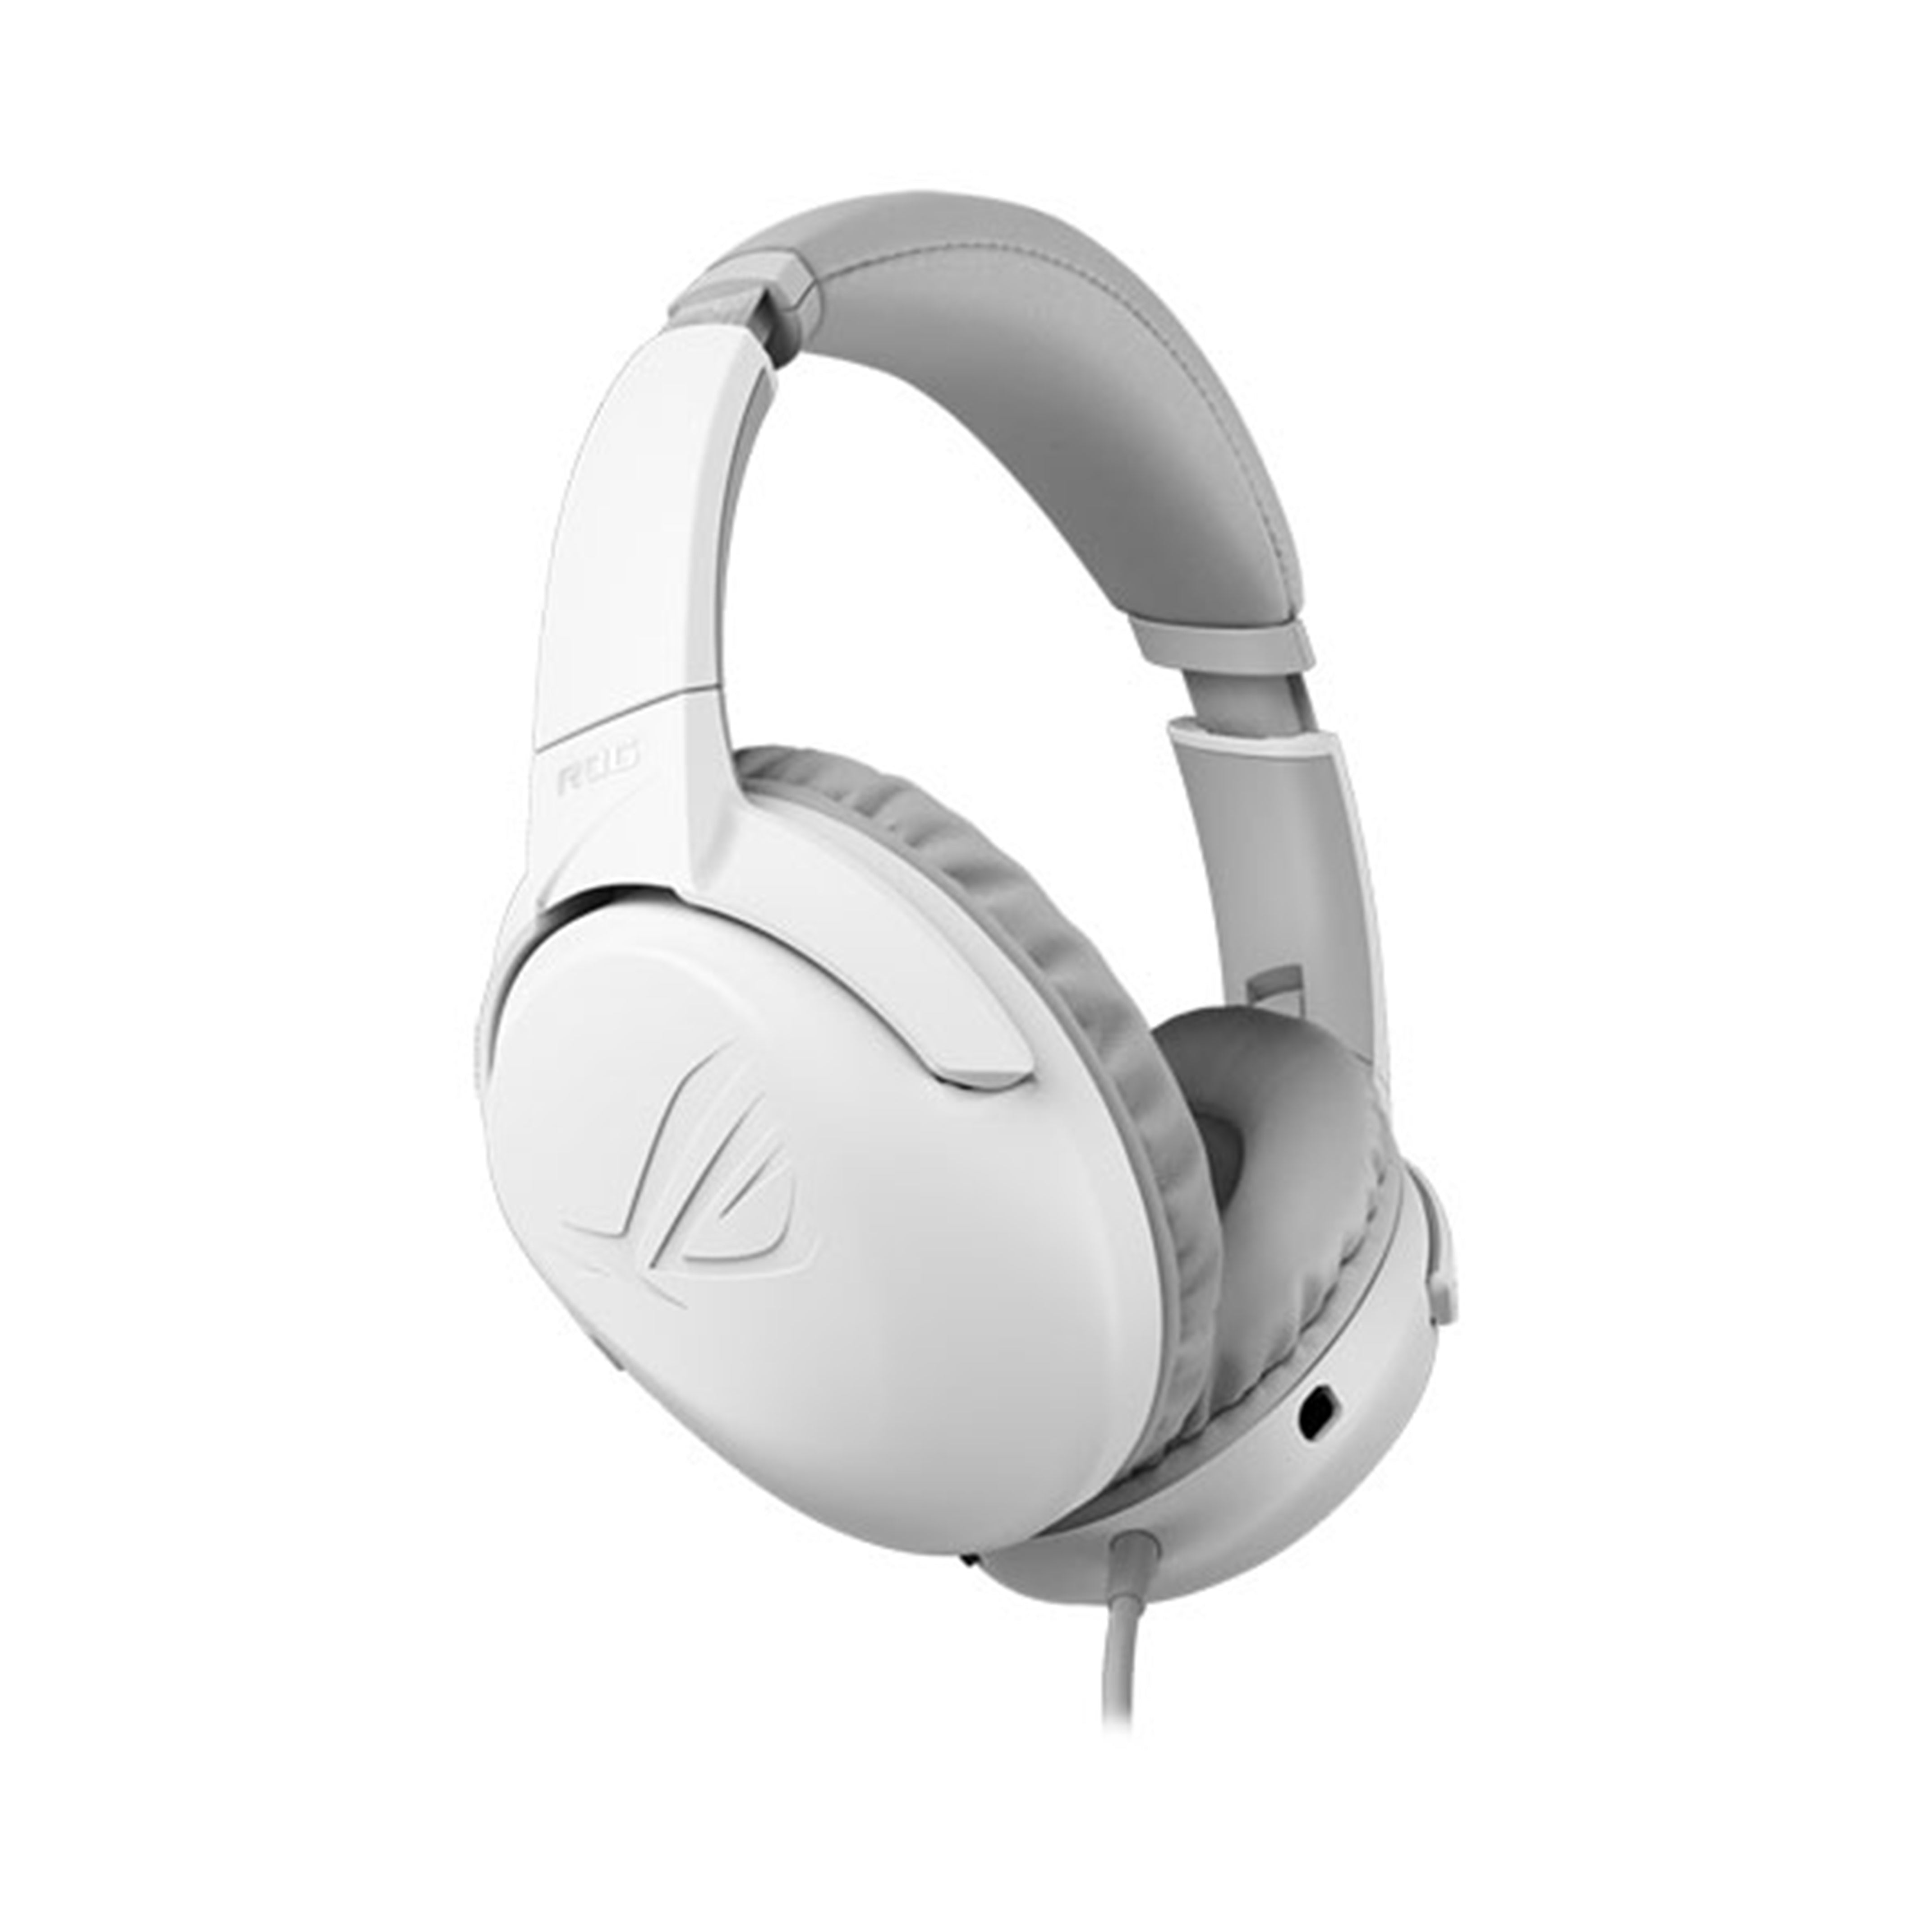 Asus ROG Strix Go Core Moonlight White Wired Gaming Headset, 29920497697020, Available at 961Souq